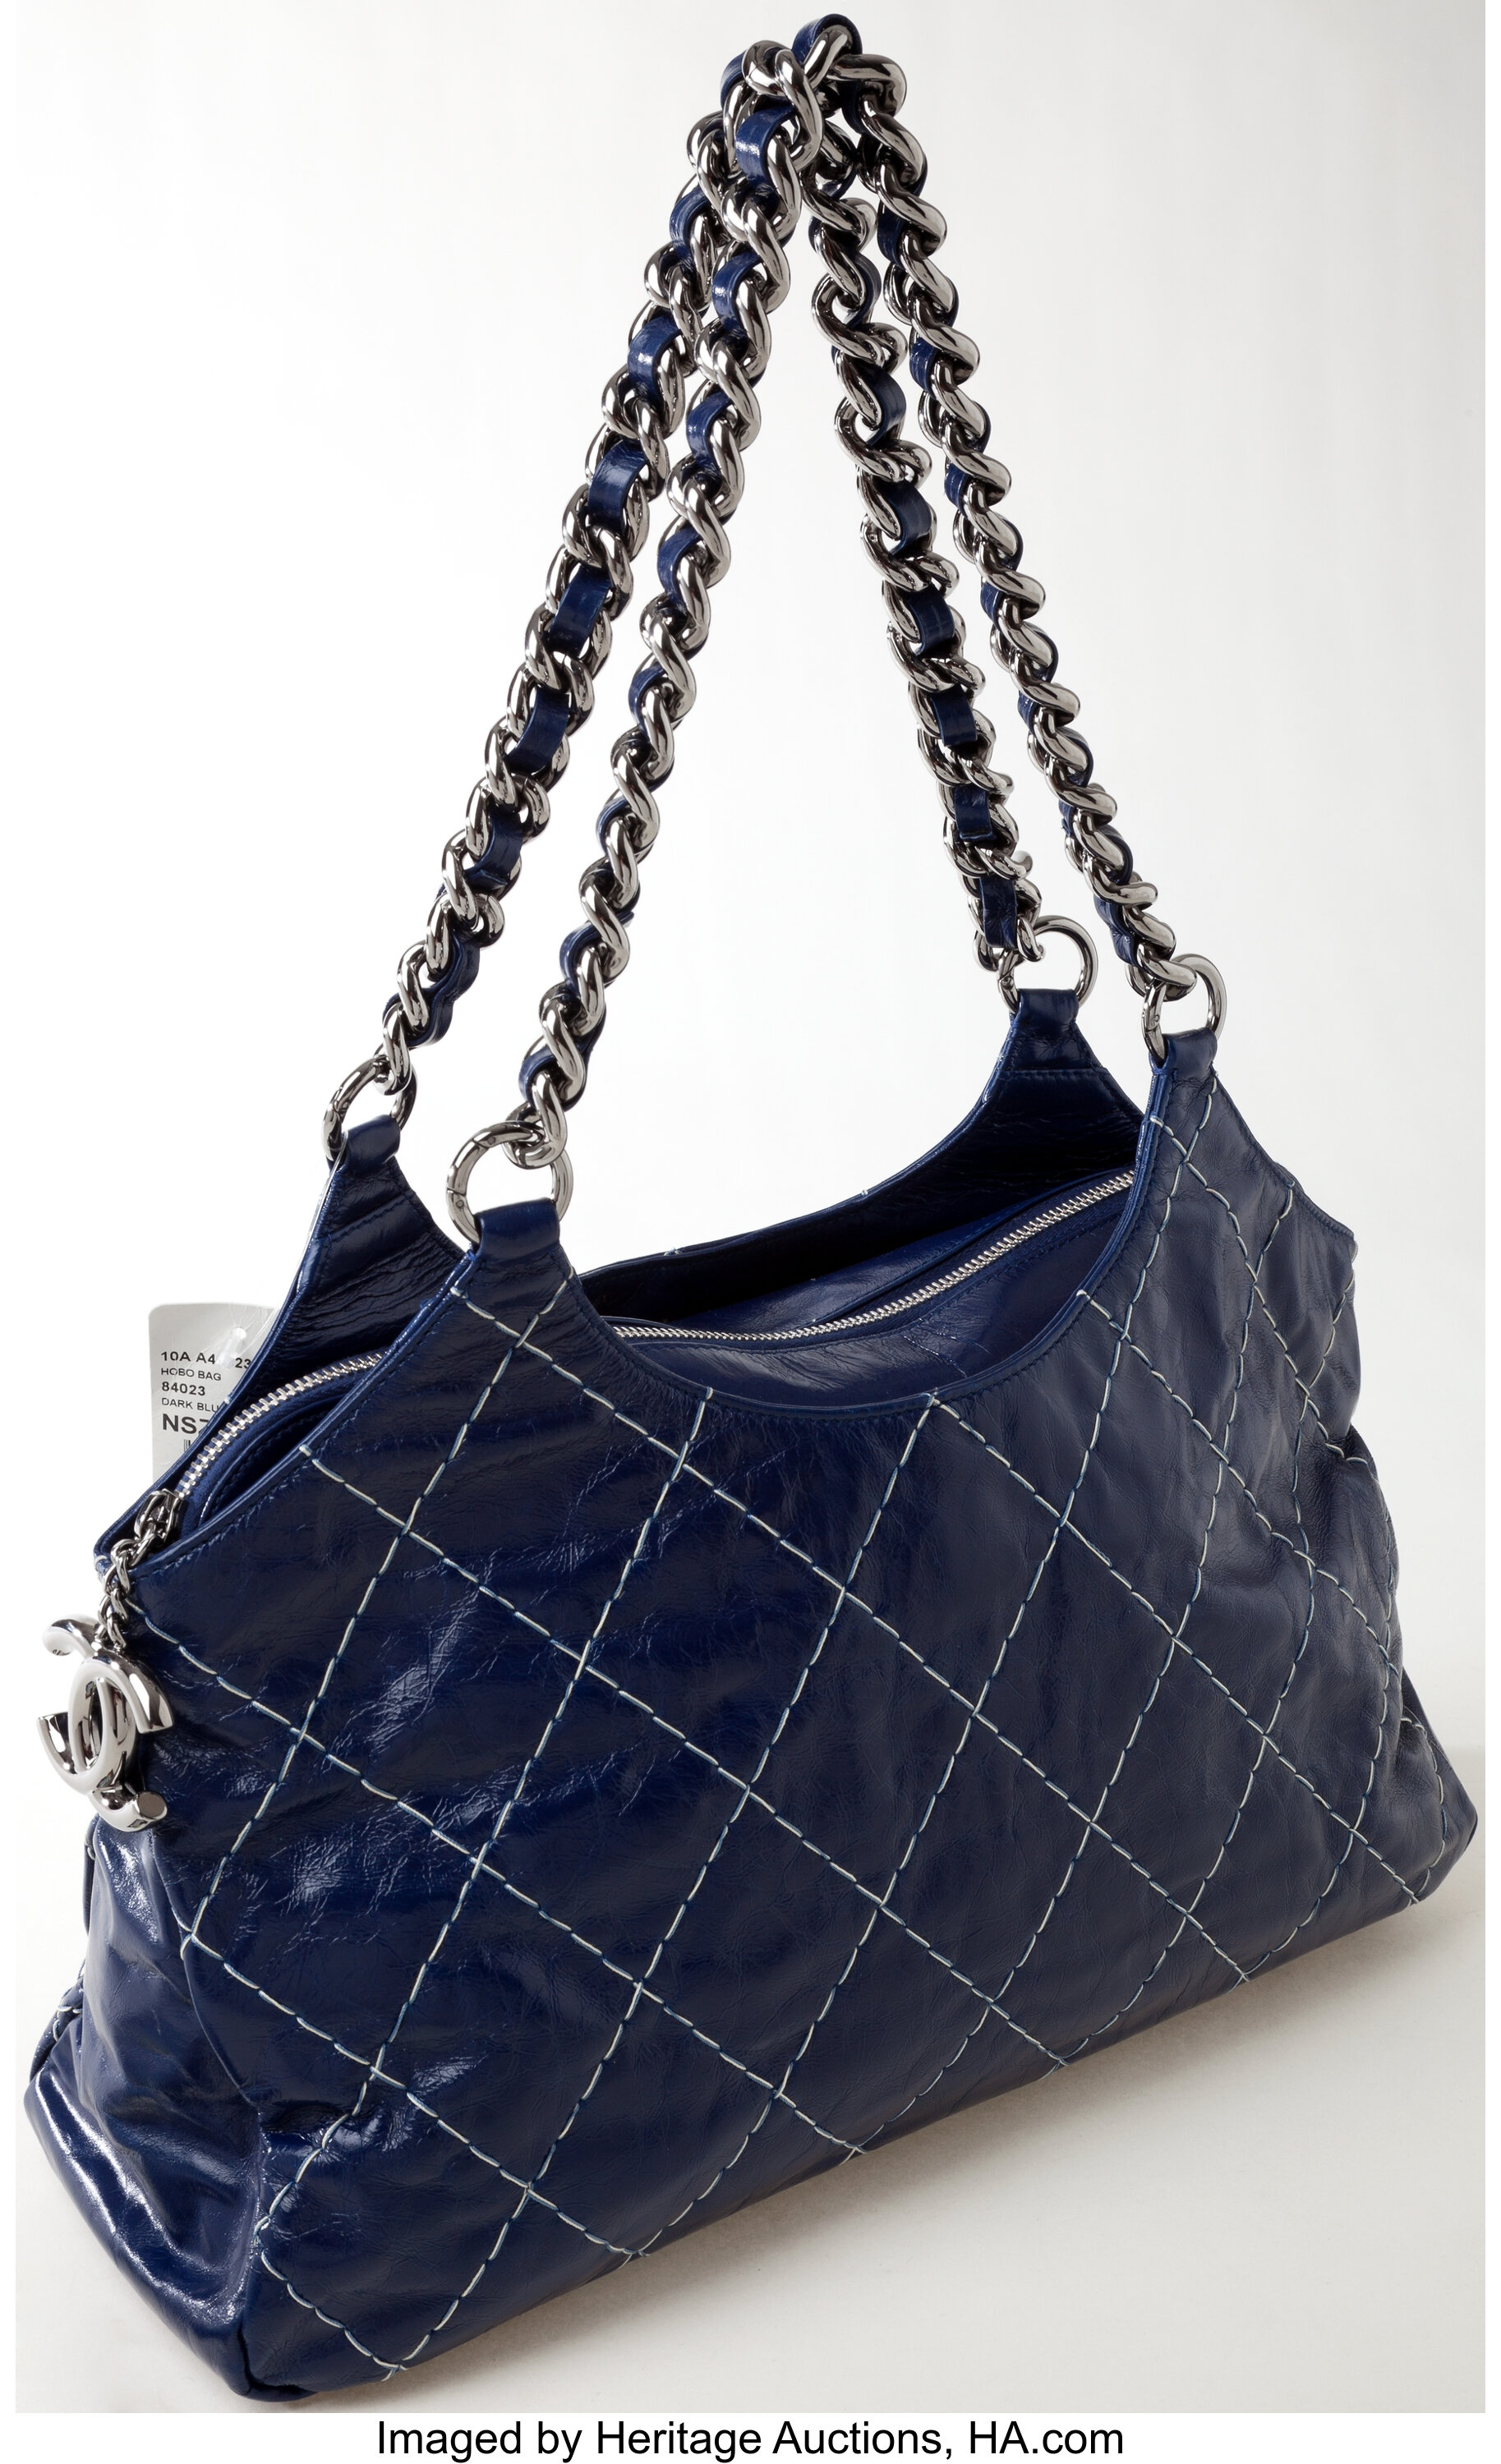 Chanel CCpurse Sac Class rabat Patton leather navy blue and silver shoulder  bag￼